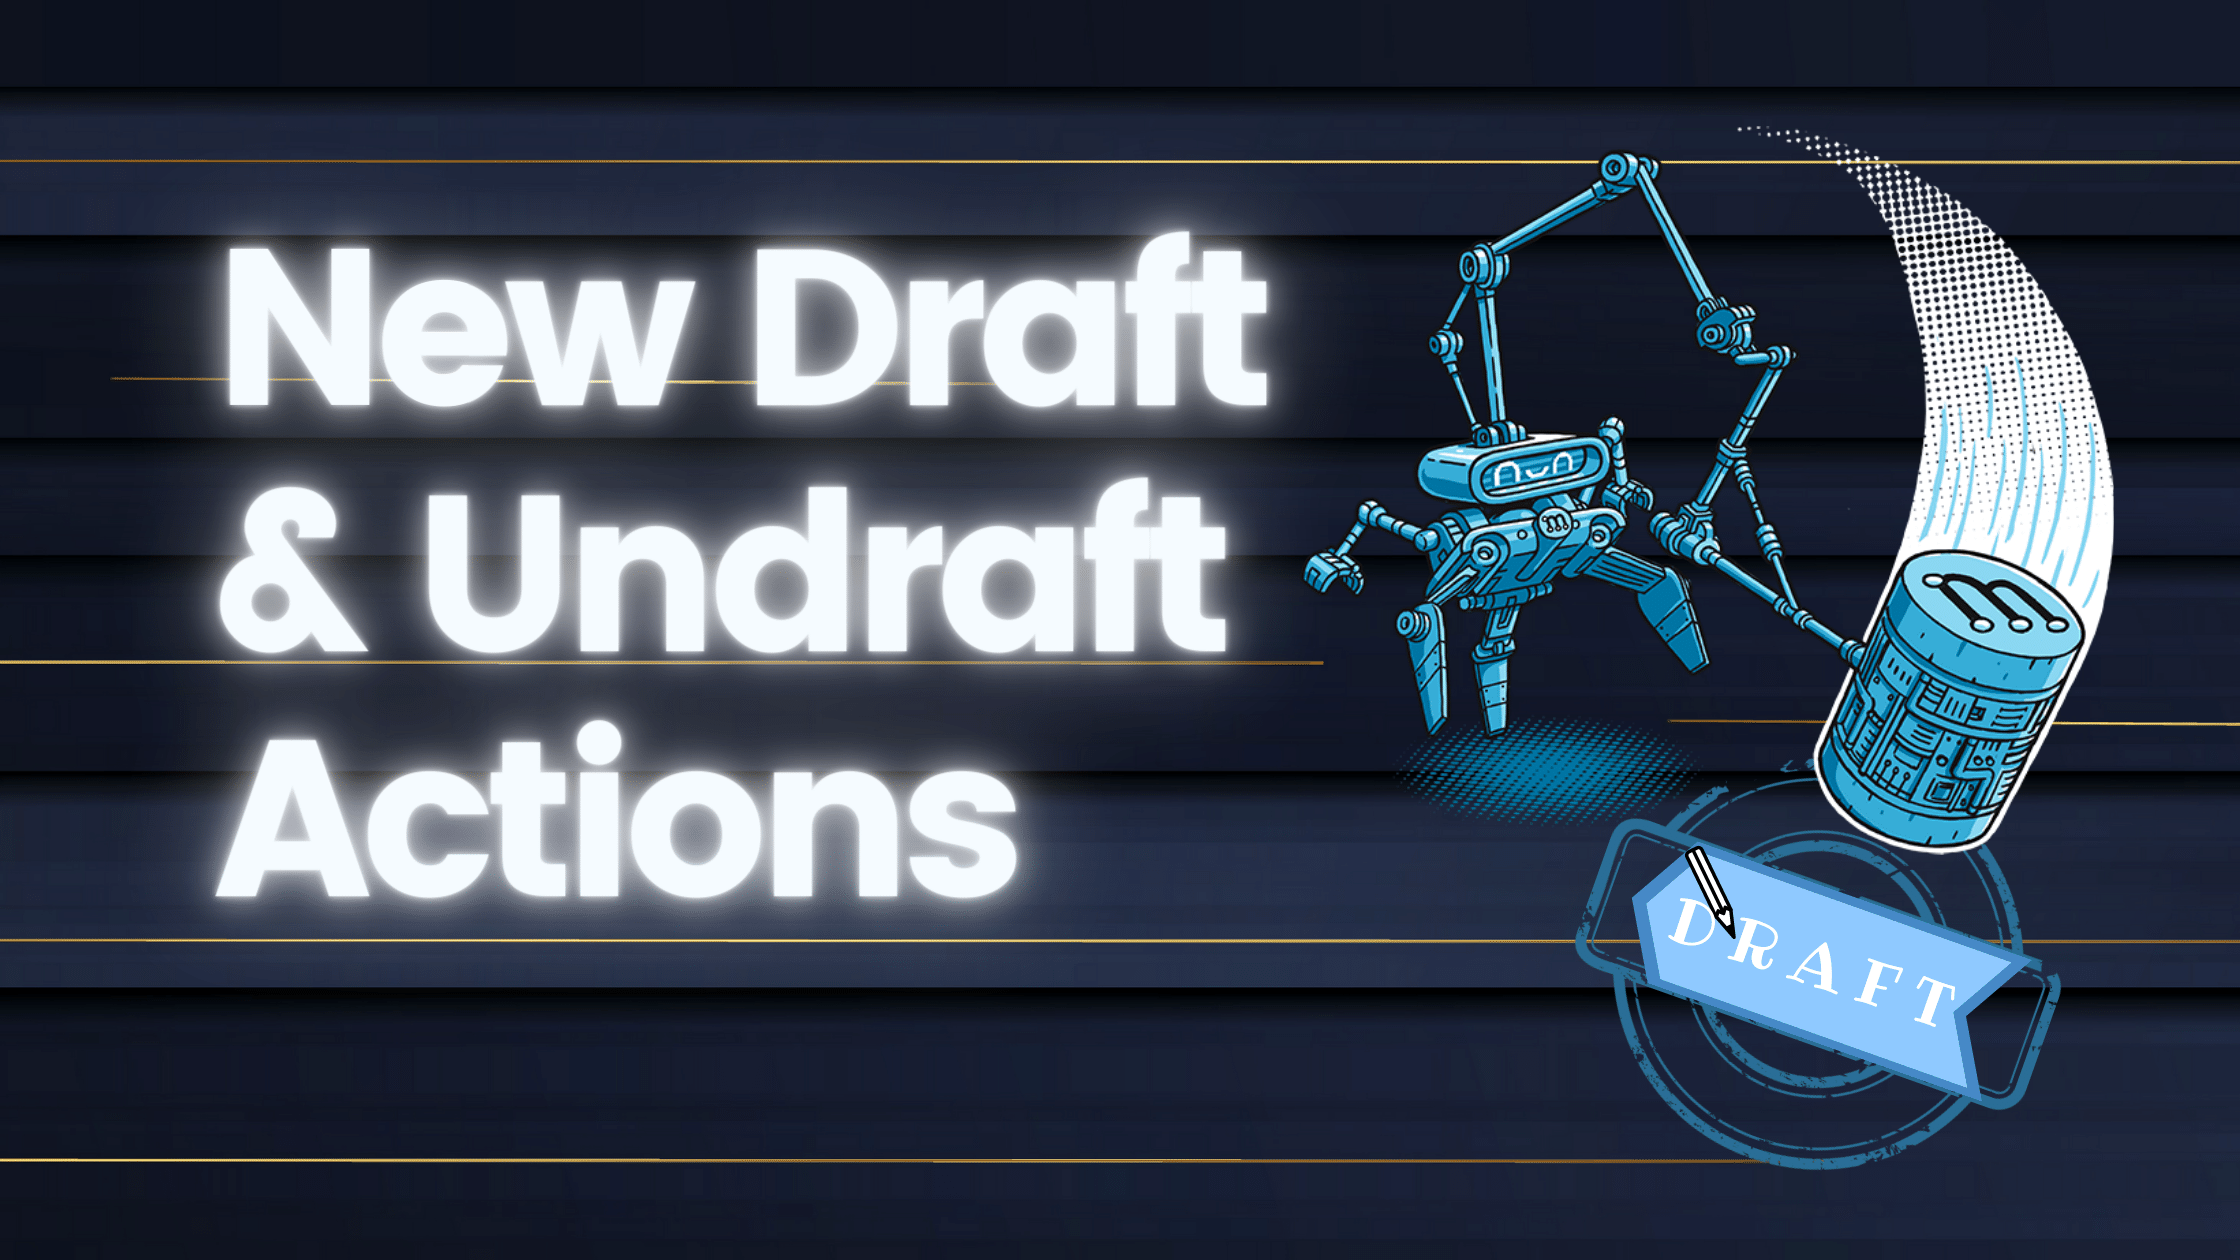 New draft and undraft actions